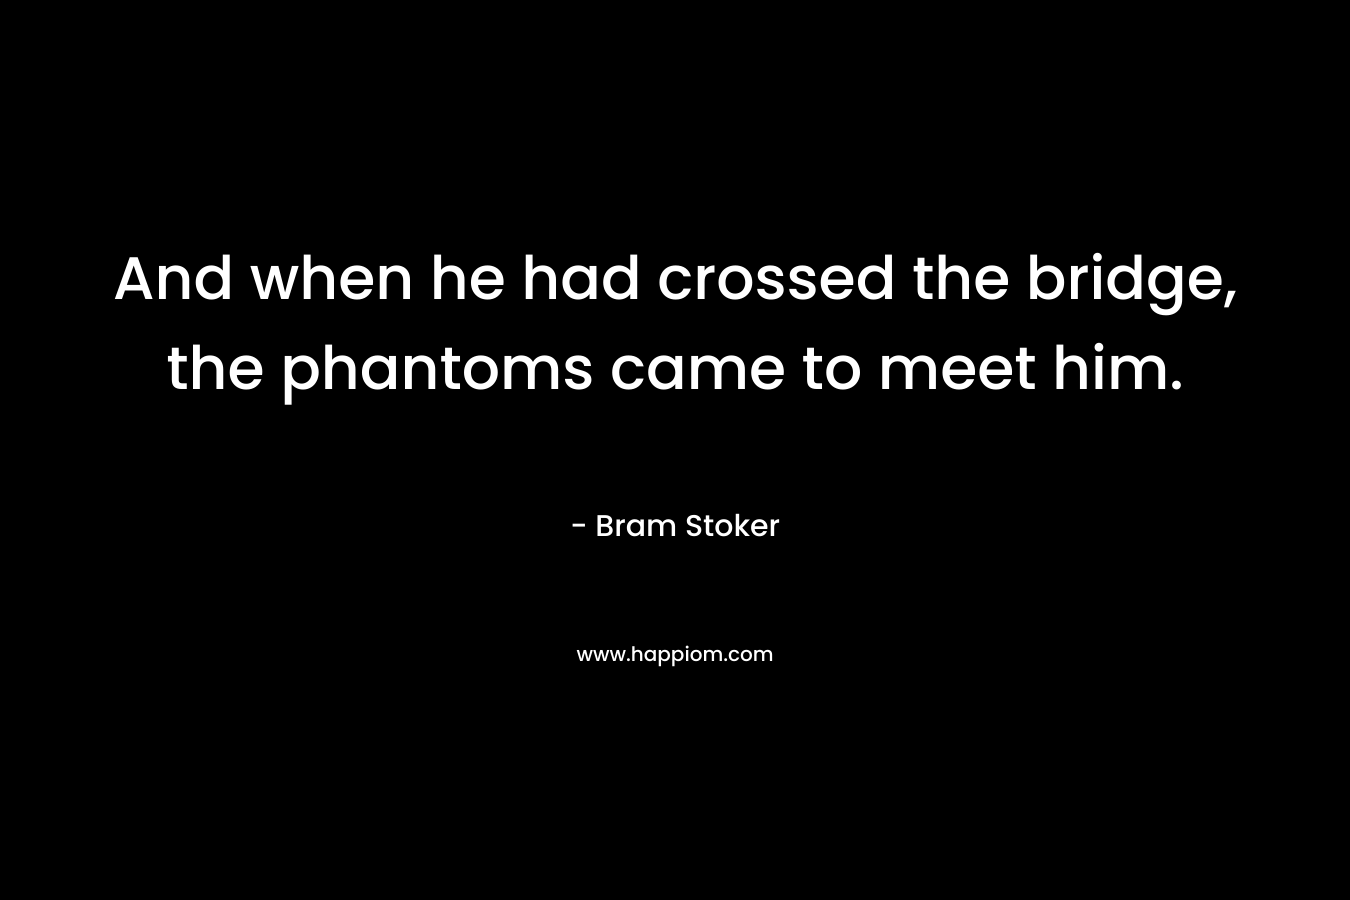 And when he had crossed the bridge, the phantoms came to meet him. – Bram Stoker